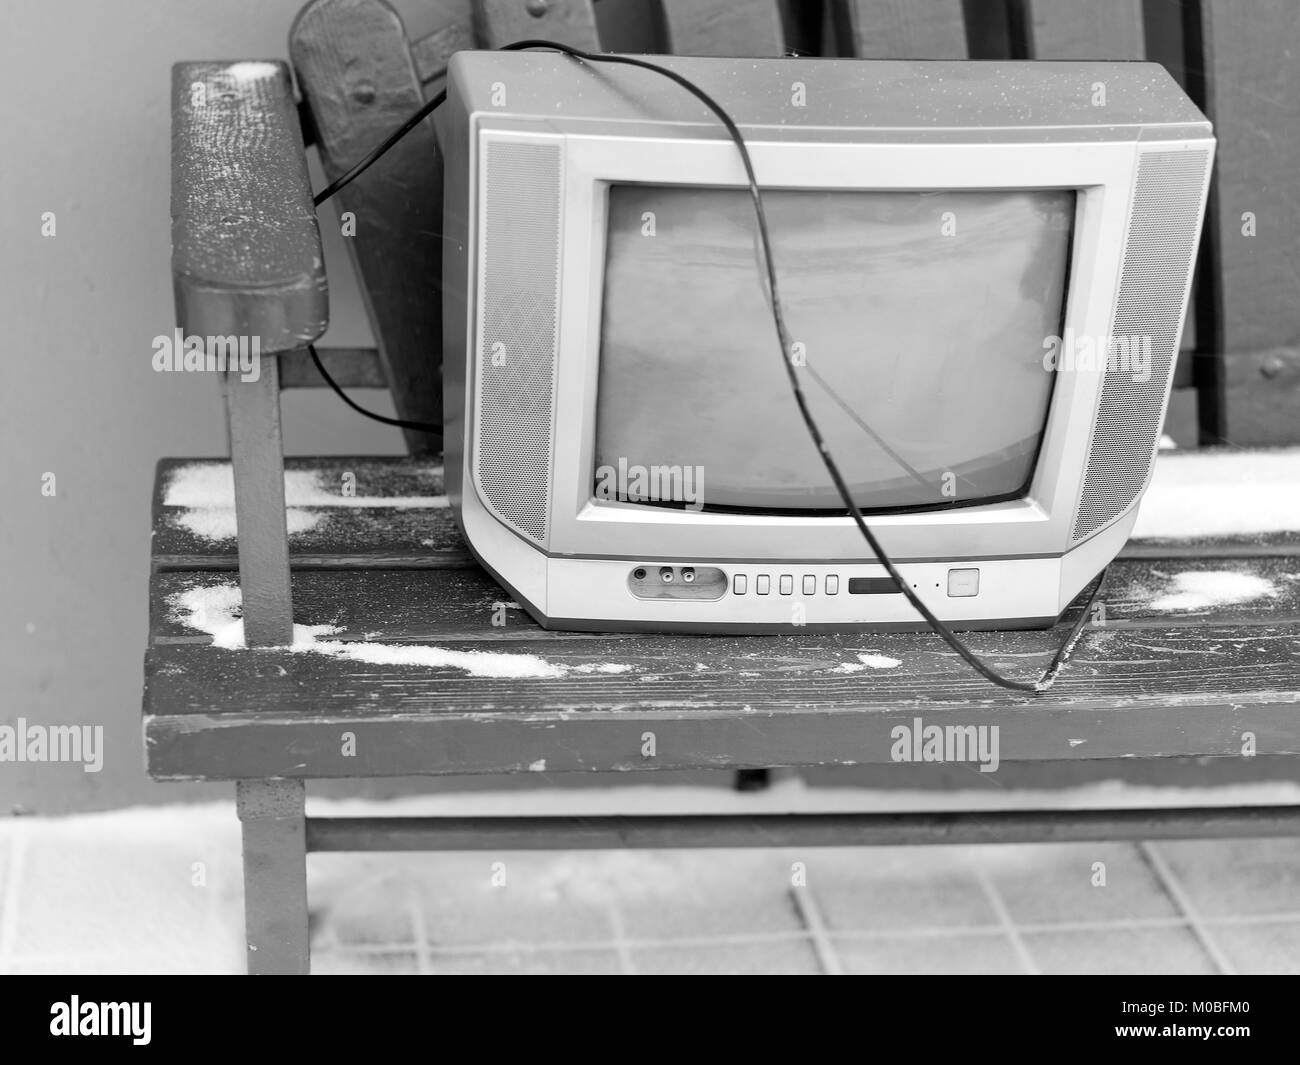 Old tv set on the bench, seems abanoned. In black and white Stock Photo